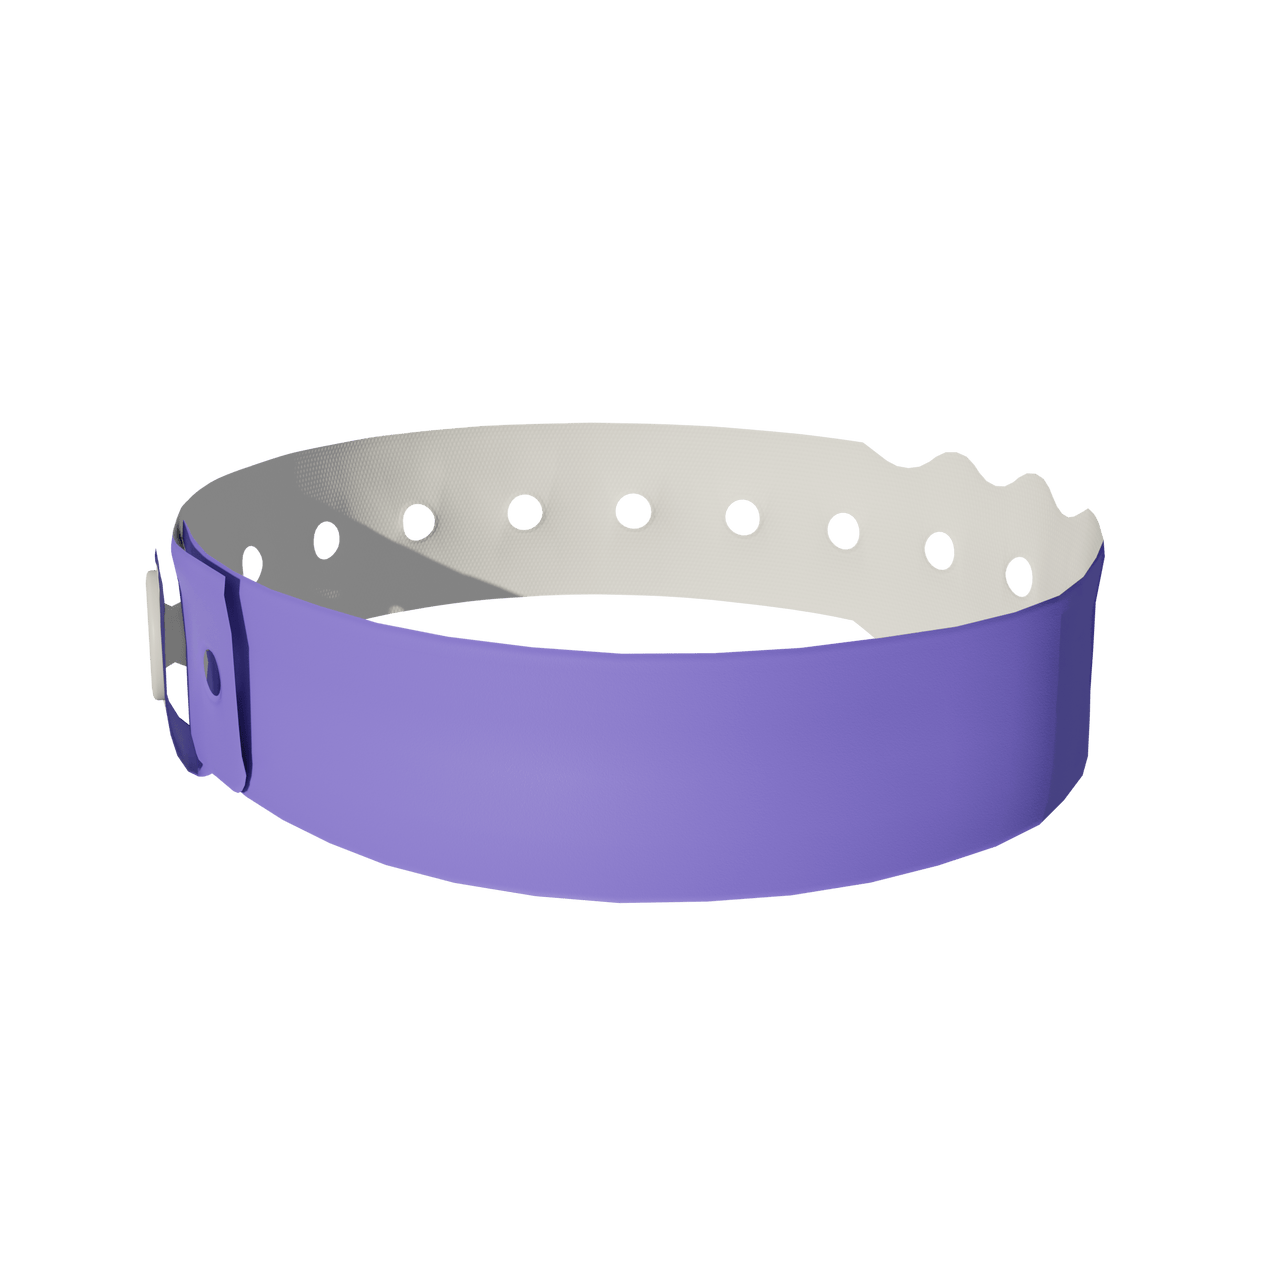 A Vinyl 3/4" x 10" L-Shape Snapped Solid Green wristband